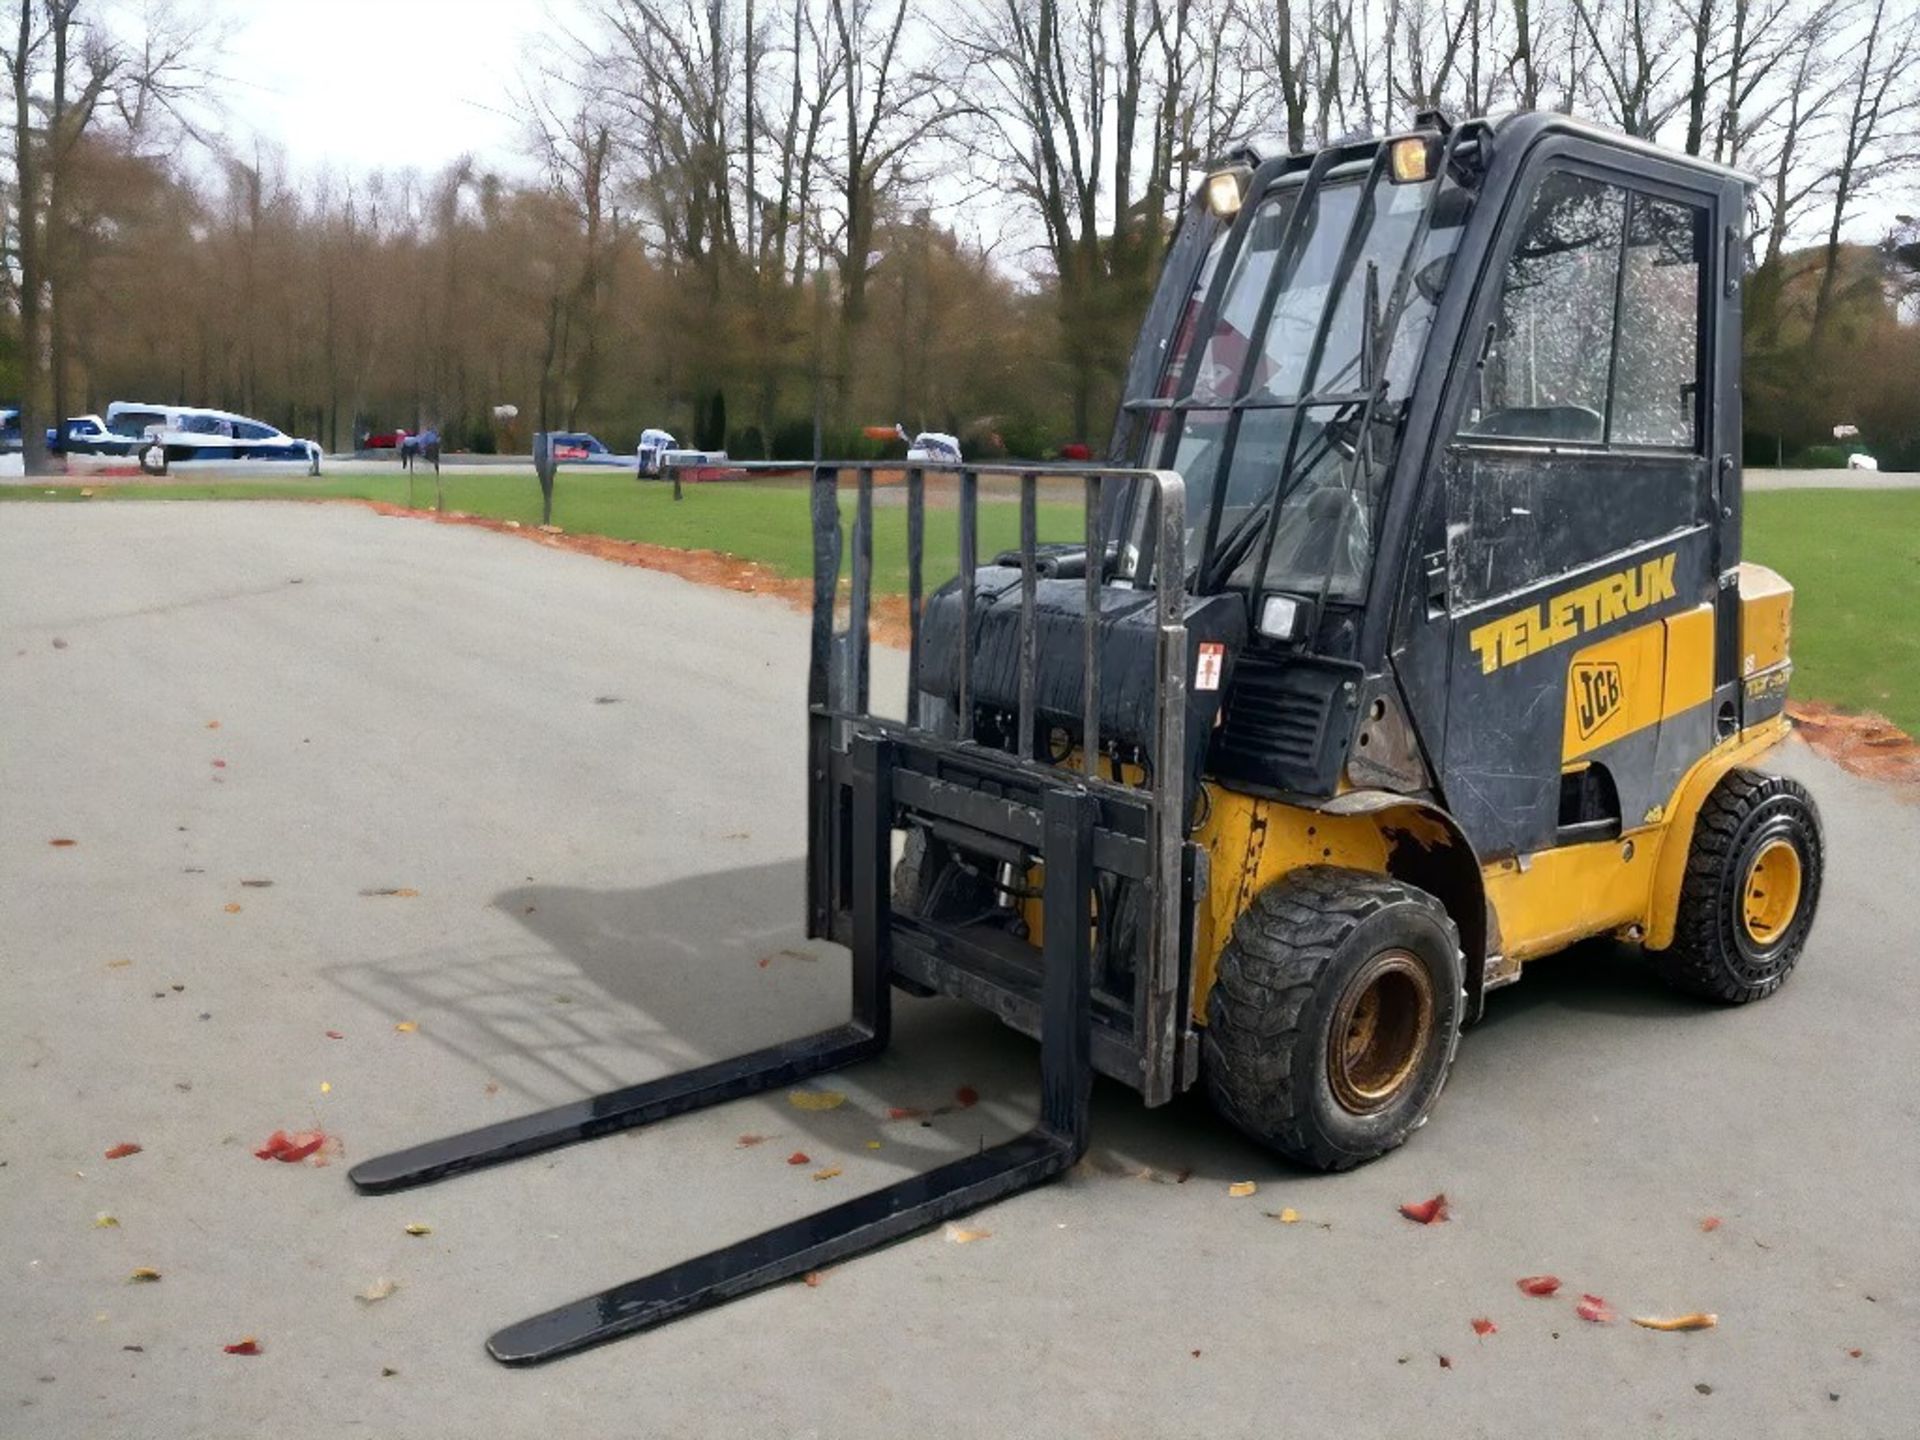 PREMIUM 2002 FORKLIFT – READY FOR HEAVY-DUTY PERFORMANCE - Image 2 of 8